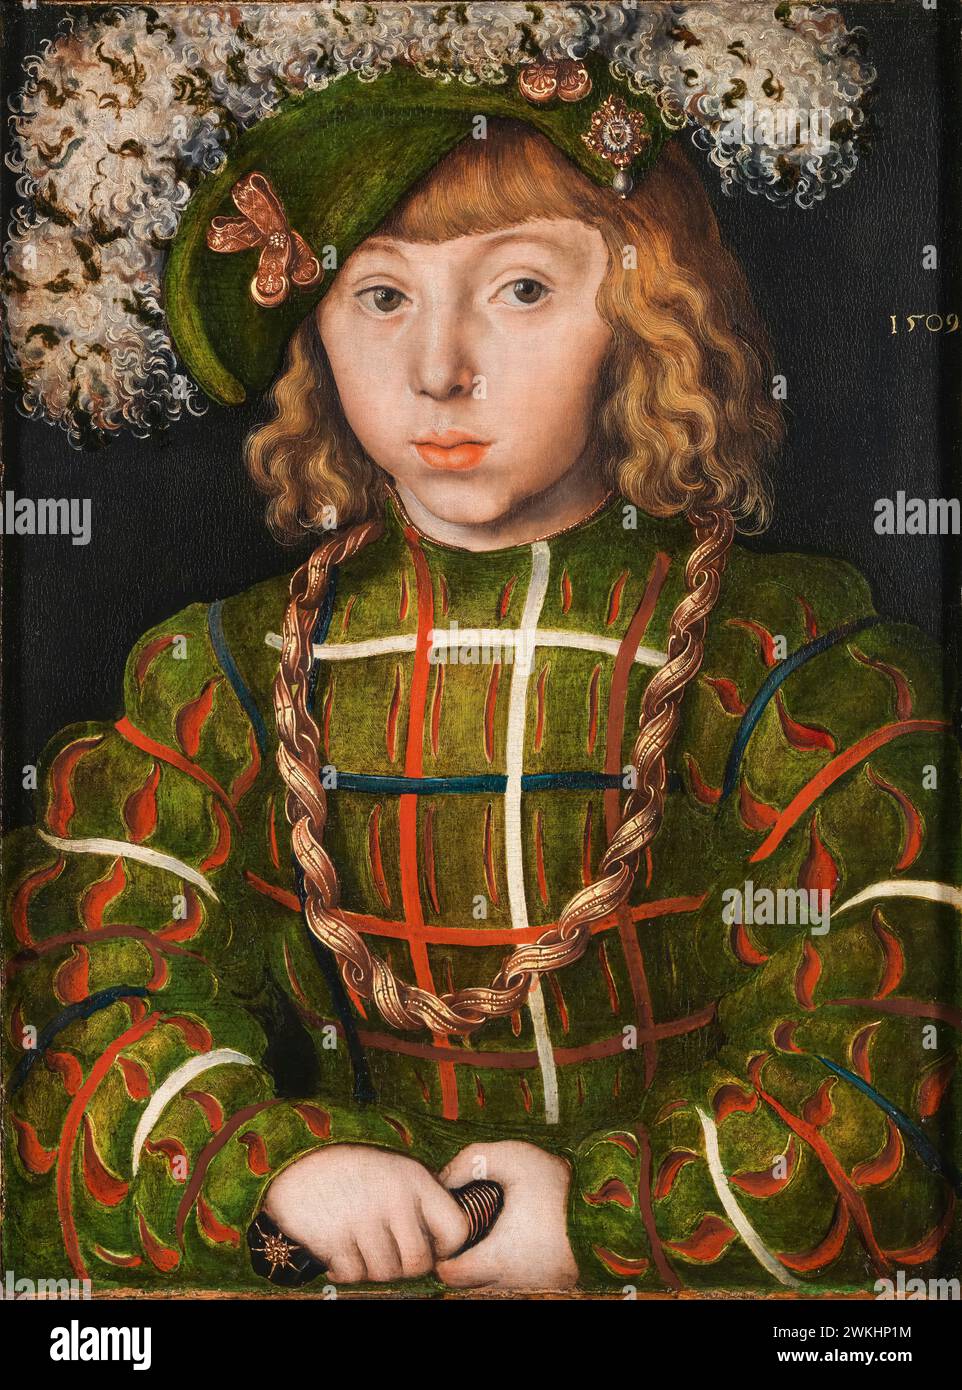 John Frederick I (Johann Friedrich), Elector of Saxony (1503-1554) as a young boy, portrait painting in oil on panel by Lucas Cranach the Elder, 1509 Stock Photo